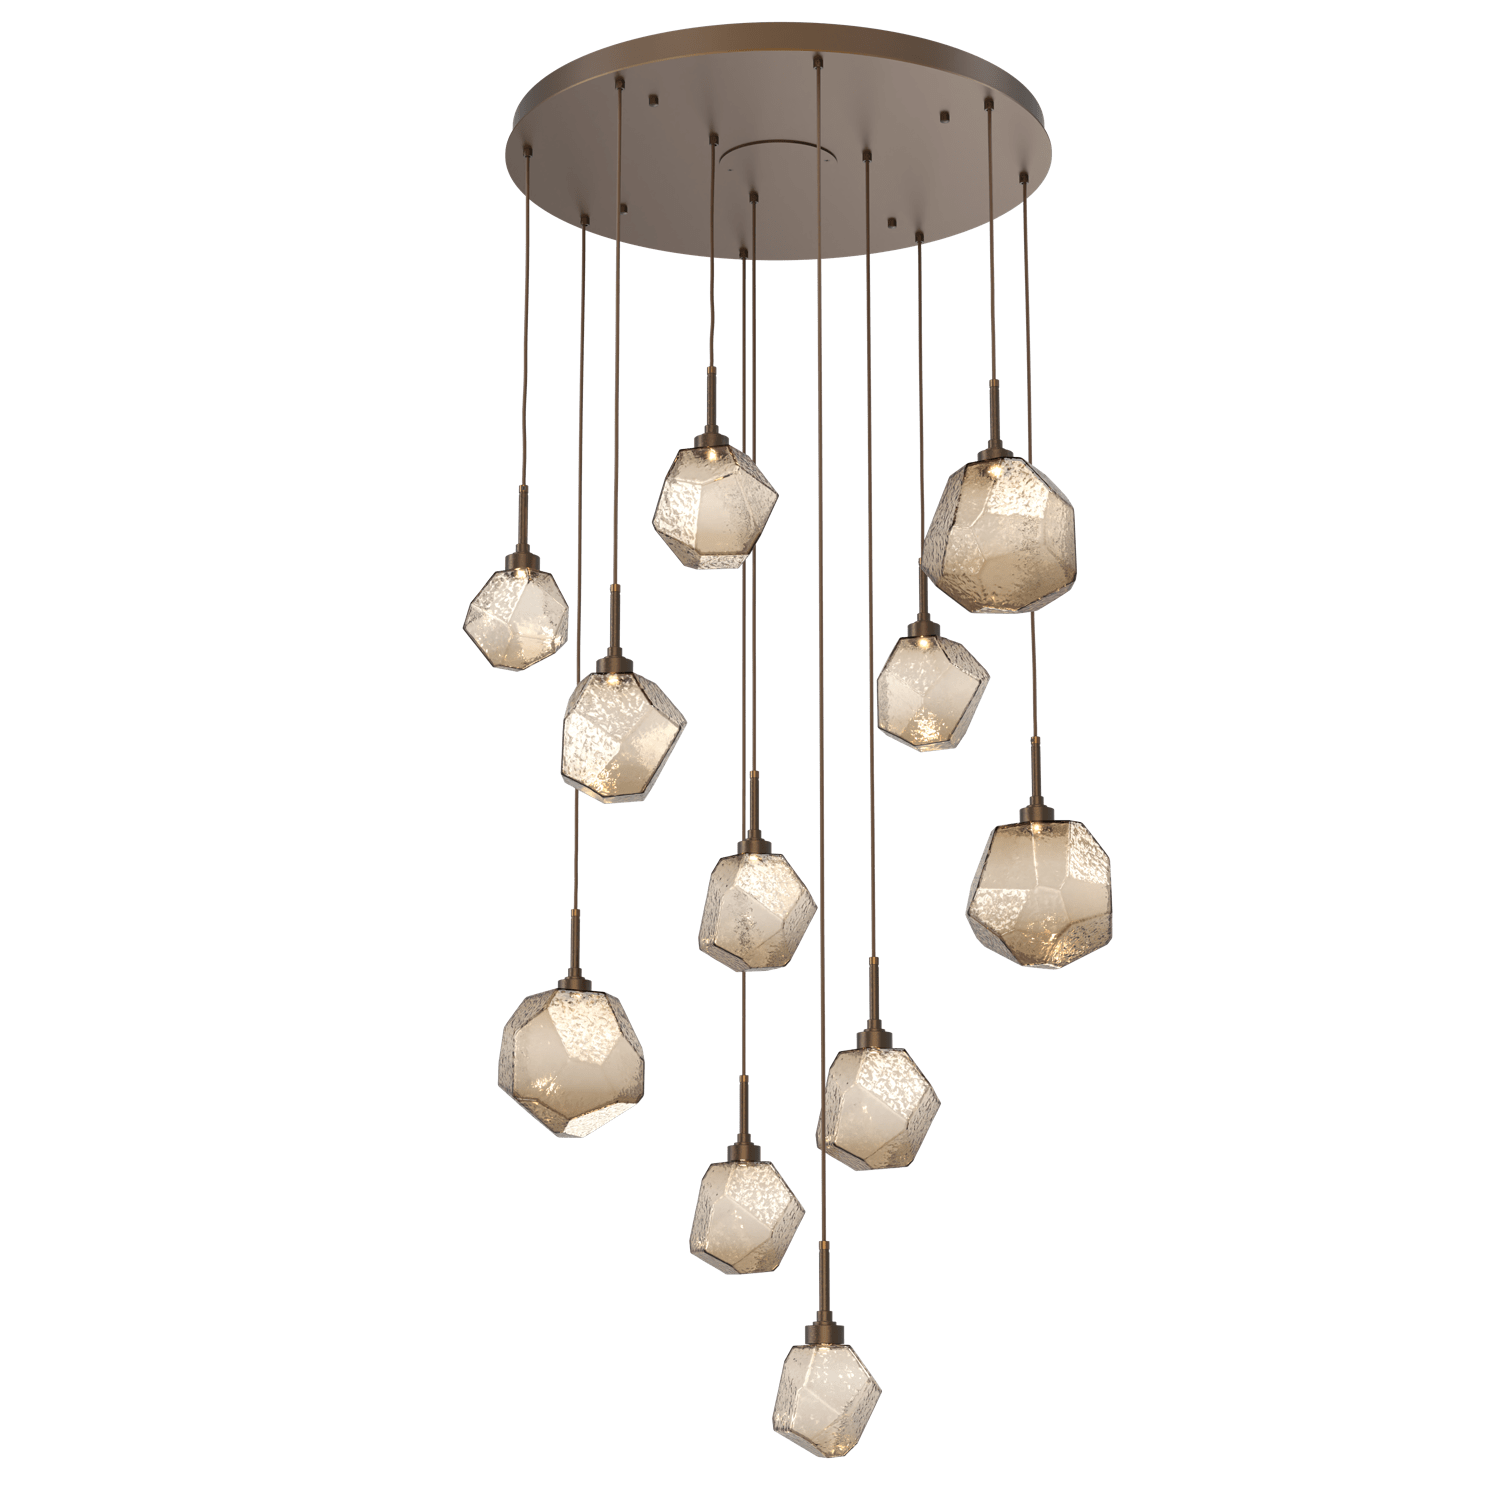 CHB0039-11-FB-B-Hammerton-Studio-Gem-11-light-round-pendant-chandelier-with-flat-bronze-finish-and-bronze-blown-glass-shades-and-LED-lamping